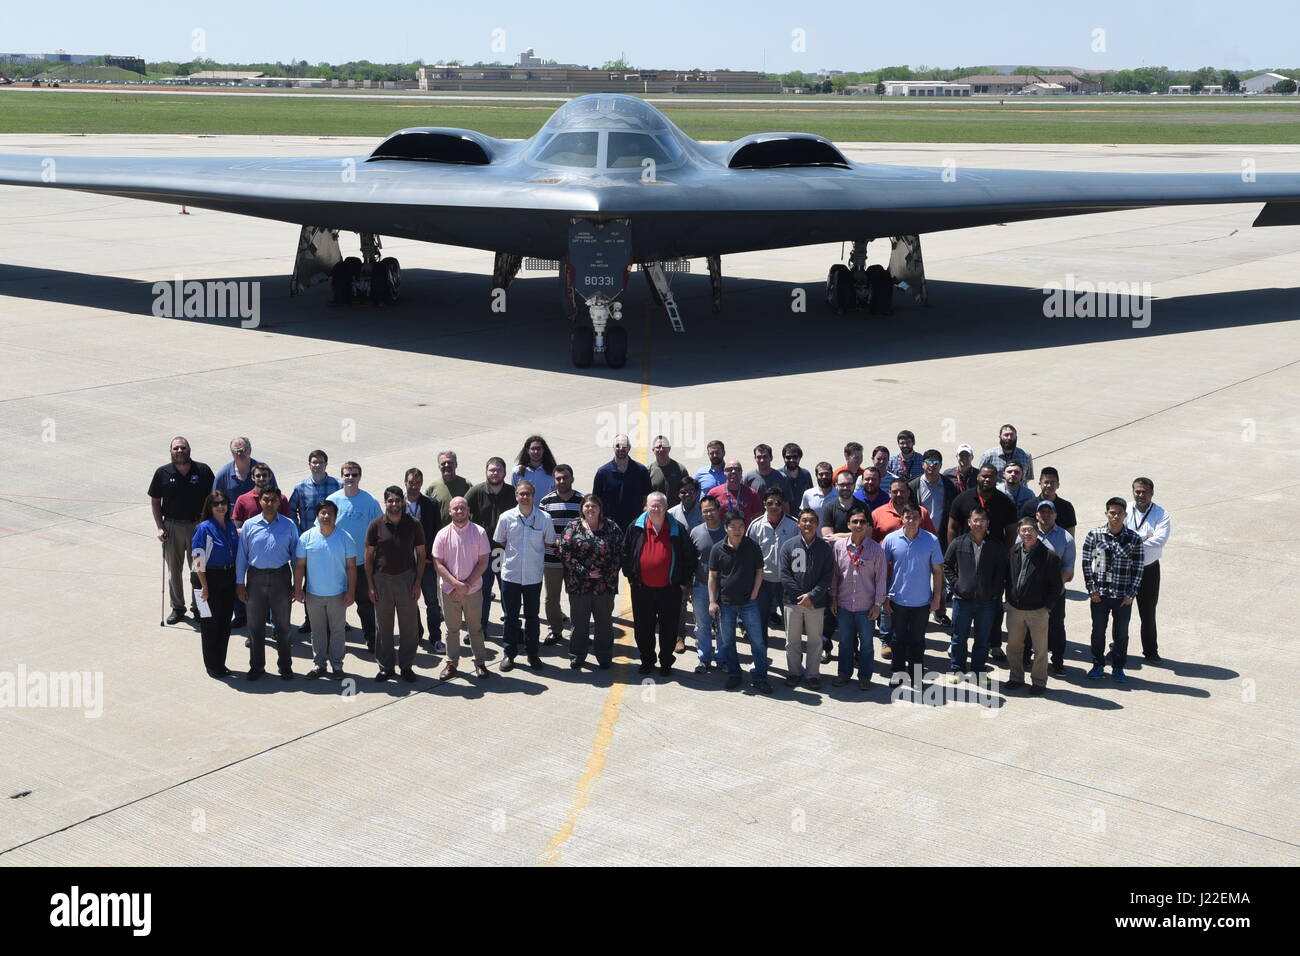 Group photo showing U.S. Air Force civilian and contractor employees in front of B-2A, serial #88-0331, 'Spirit of South Carolina' of the 509th Bomb Wing, Air Force Global Strike Command, on the parking ramp at Tinker Air Force Base, Oklahoma, during a visit April 11, 2017. The B-2A 'stealth bomber' visited the base to allow hundreds of personnel who work in direct support of the aircraft program through continuous software upgrades to see it in person and better understand the aircrafts' role in the nation’s defense. (U.S. Air Force photo/Greg L. Davis) Stock Photo